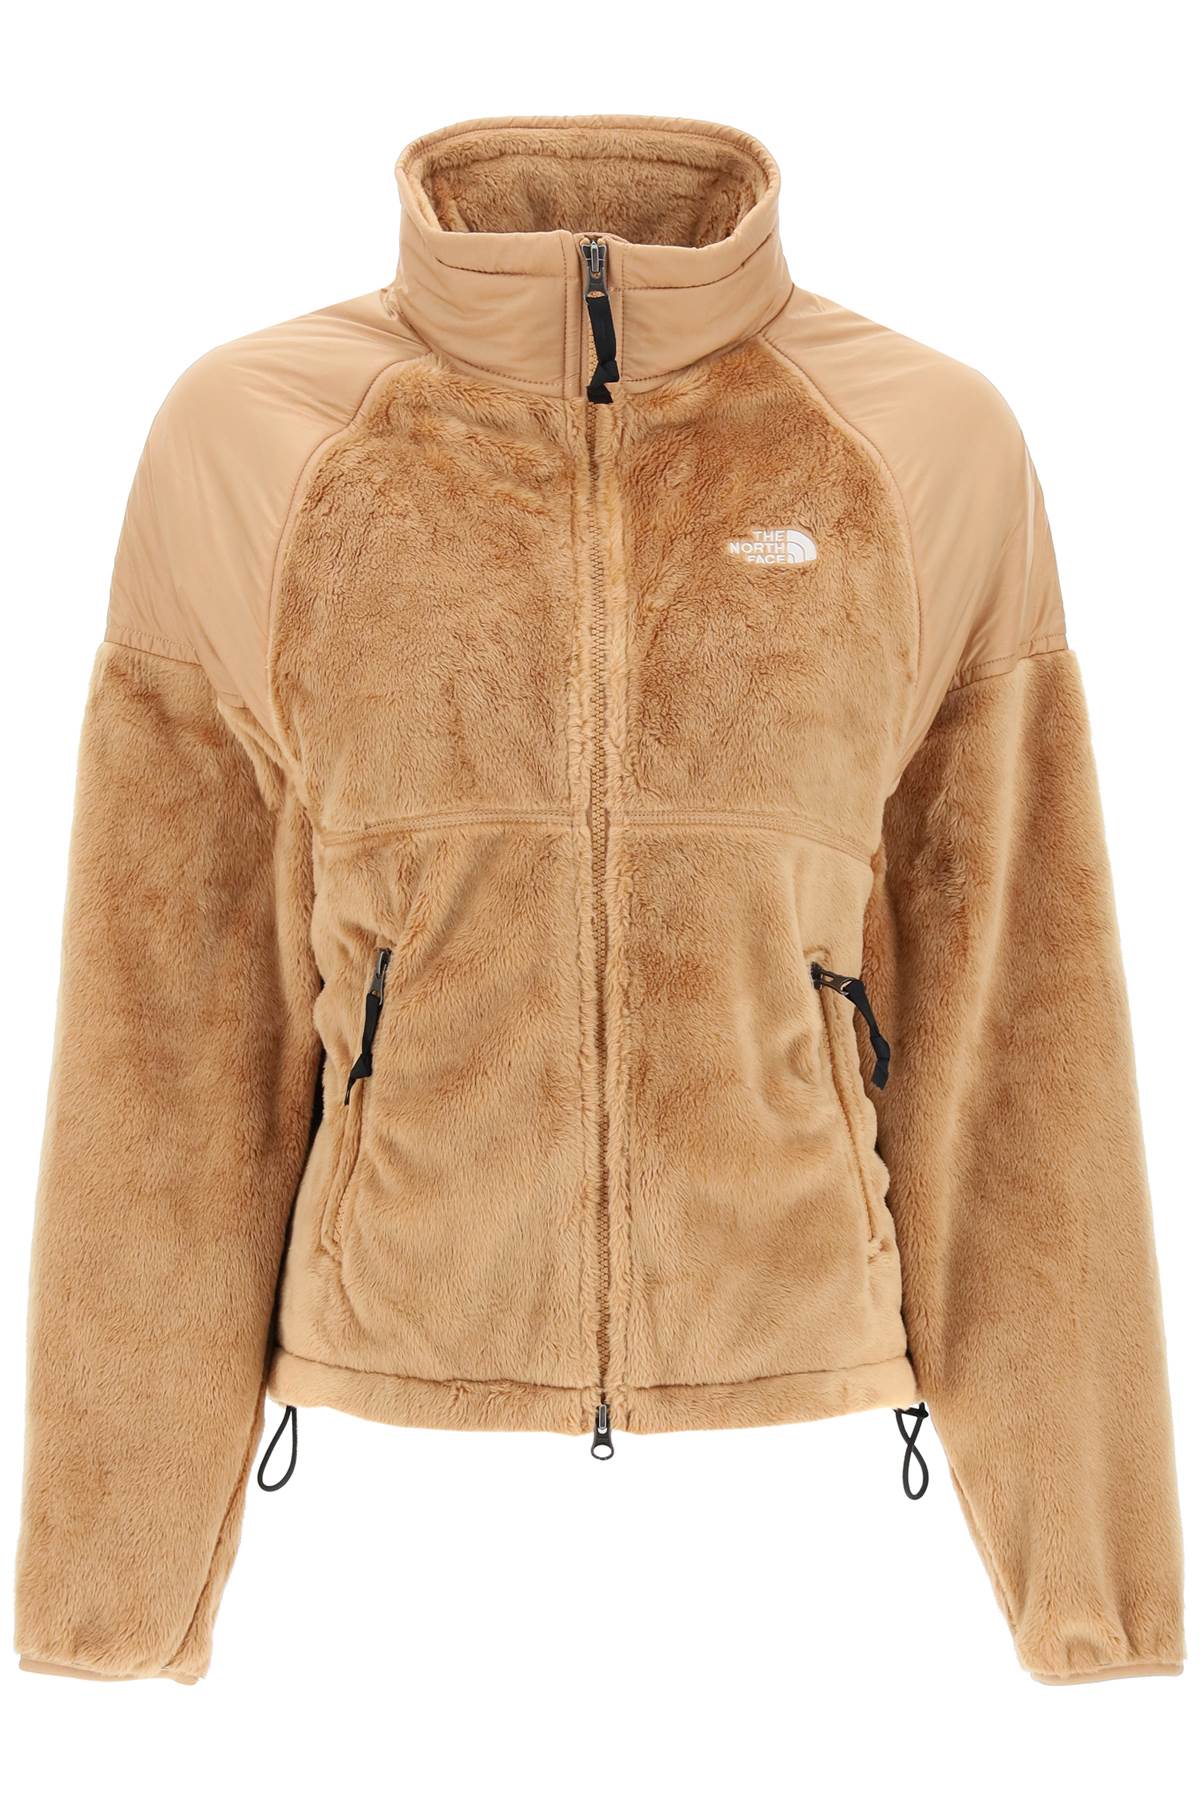 The North Face Versa Velour Jacket In Recycled Fleece And Ripstop - 0ALMOND BUTTER (Beige) - female - Size: Medium